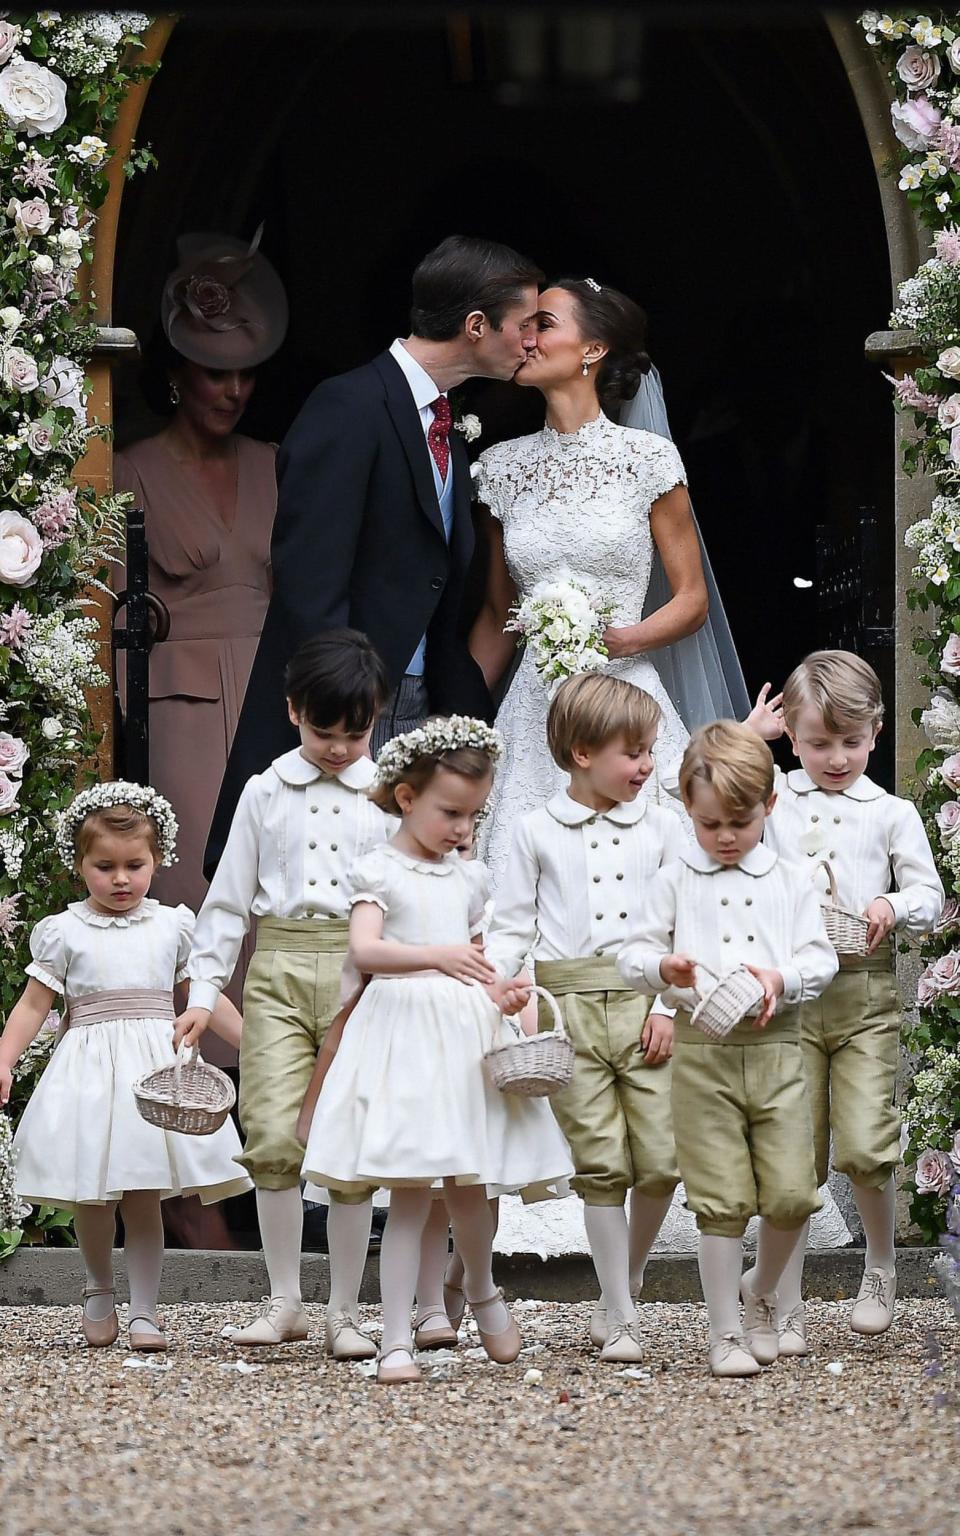 Pippa and James leave the church, flanked by their bridesmaids ad pageboys - Credit: AFP